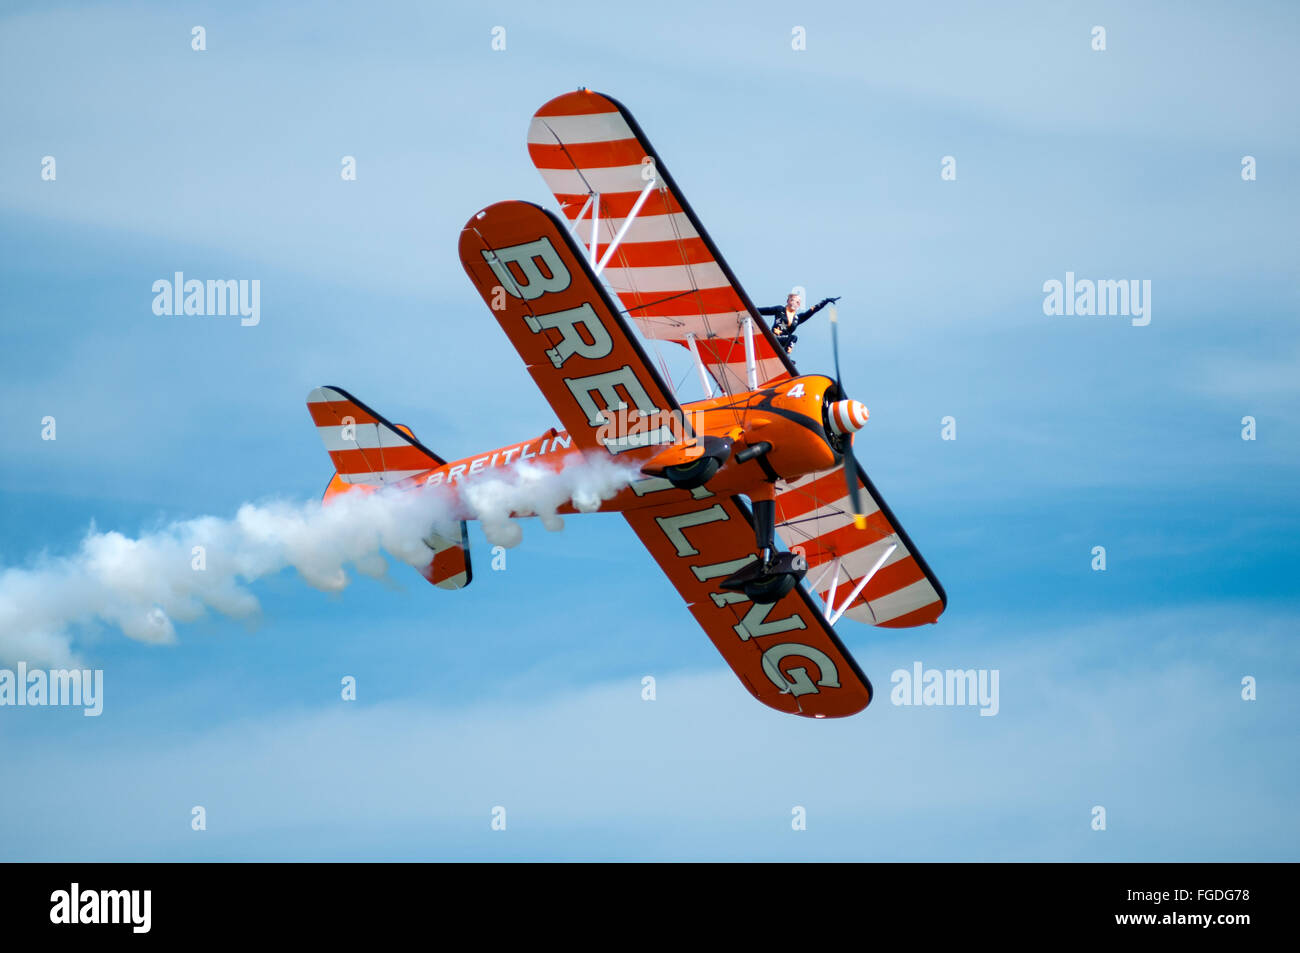 A display of 'wing walking' upon the wing of a Boeing Stearman aircraft during an air show. Stock Photo